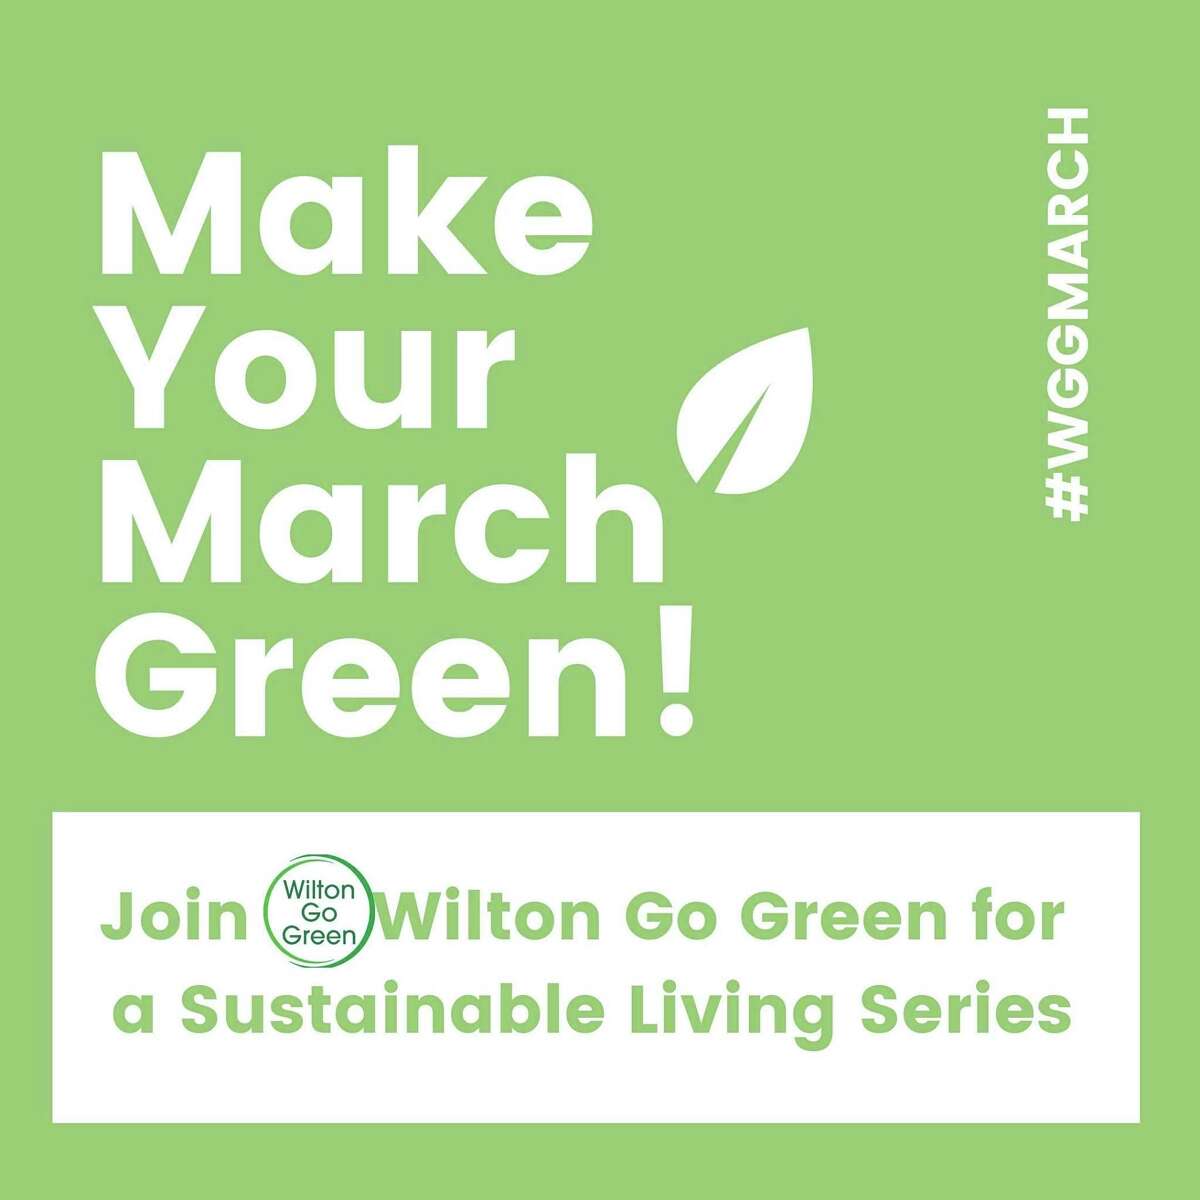 Wilton Go Green is hosting a month of programming to promote small sustainable changes in the community entitled "Make Your March Green."